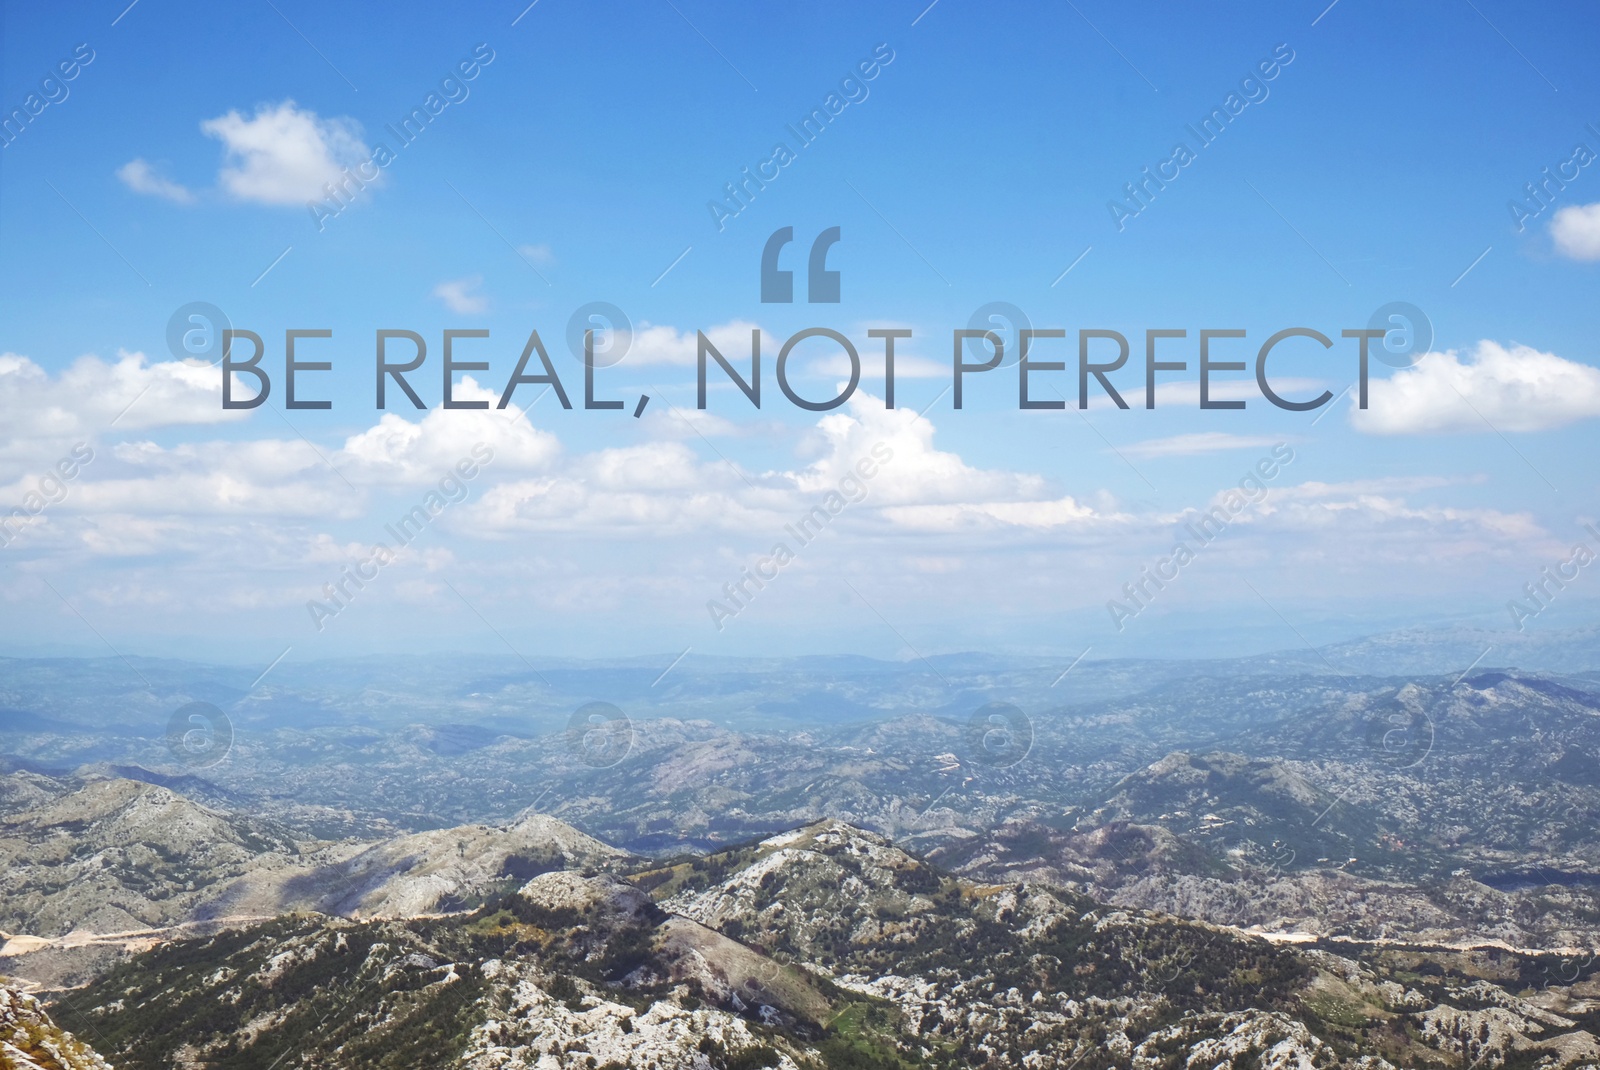 Image of Be Real, Not Perfect. Inspirational quote reminding that being sincere with yourself and others is harmonic way to live. Text against beautiful mountain landscape